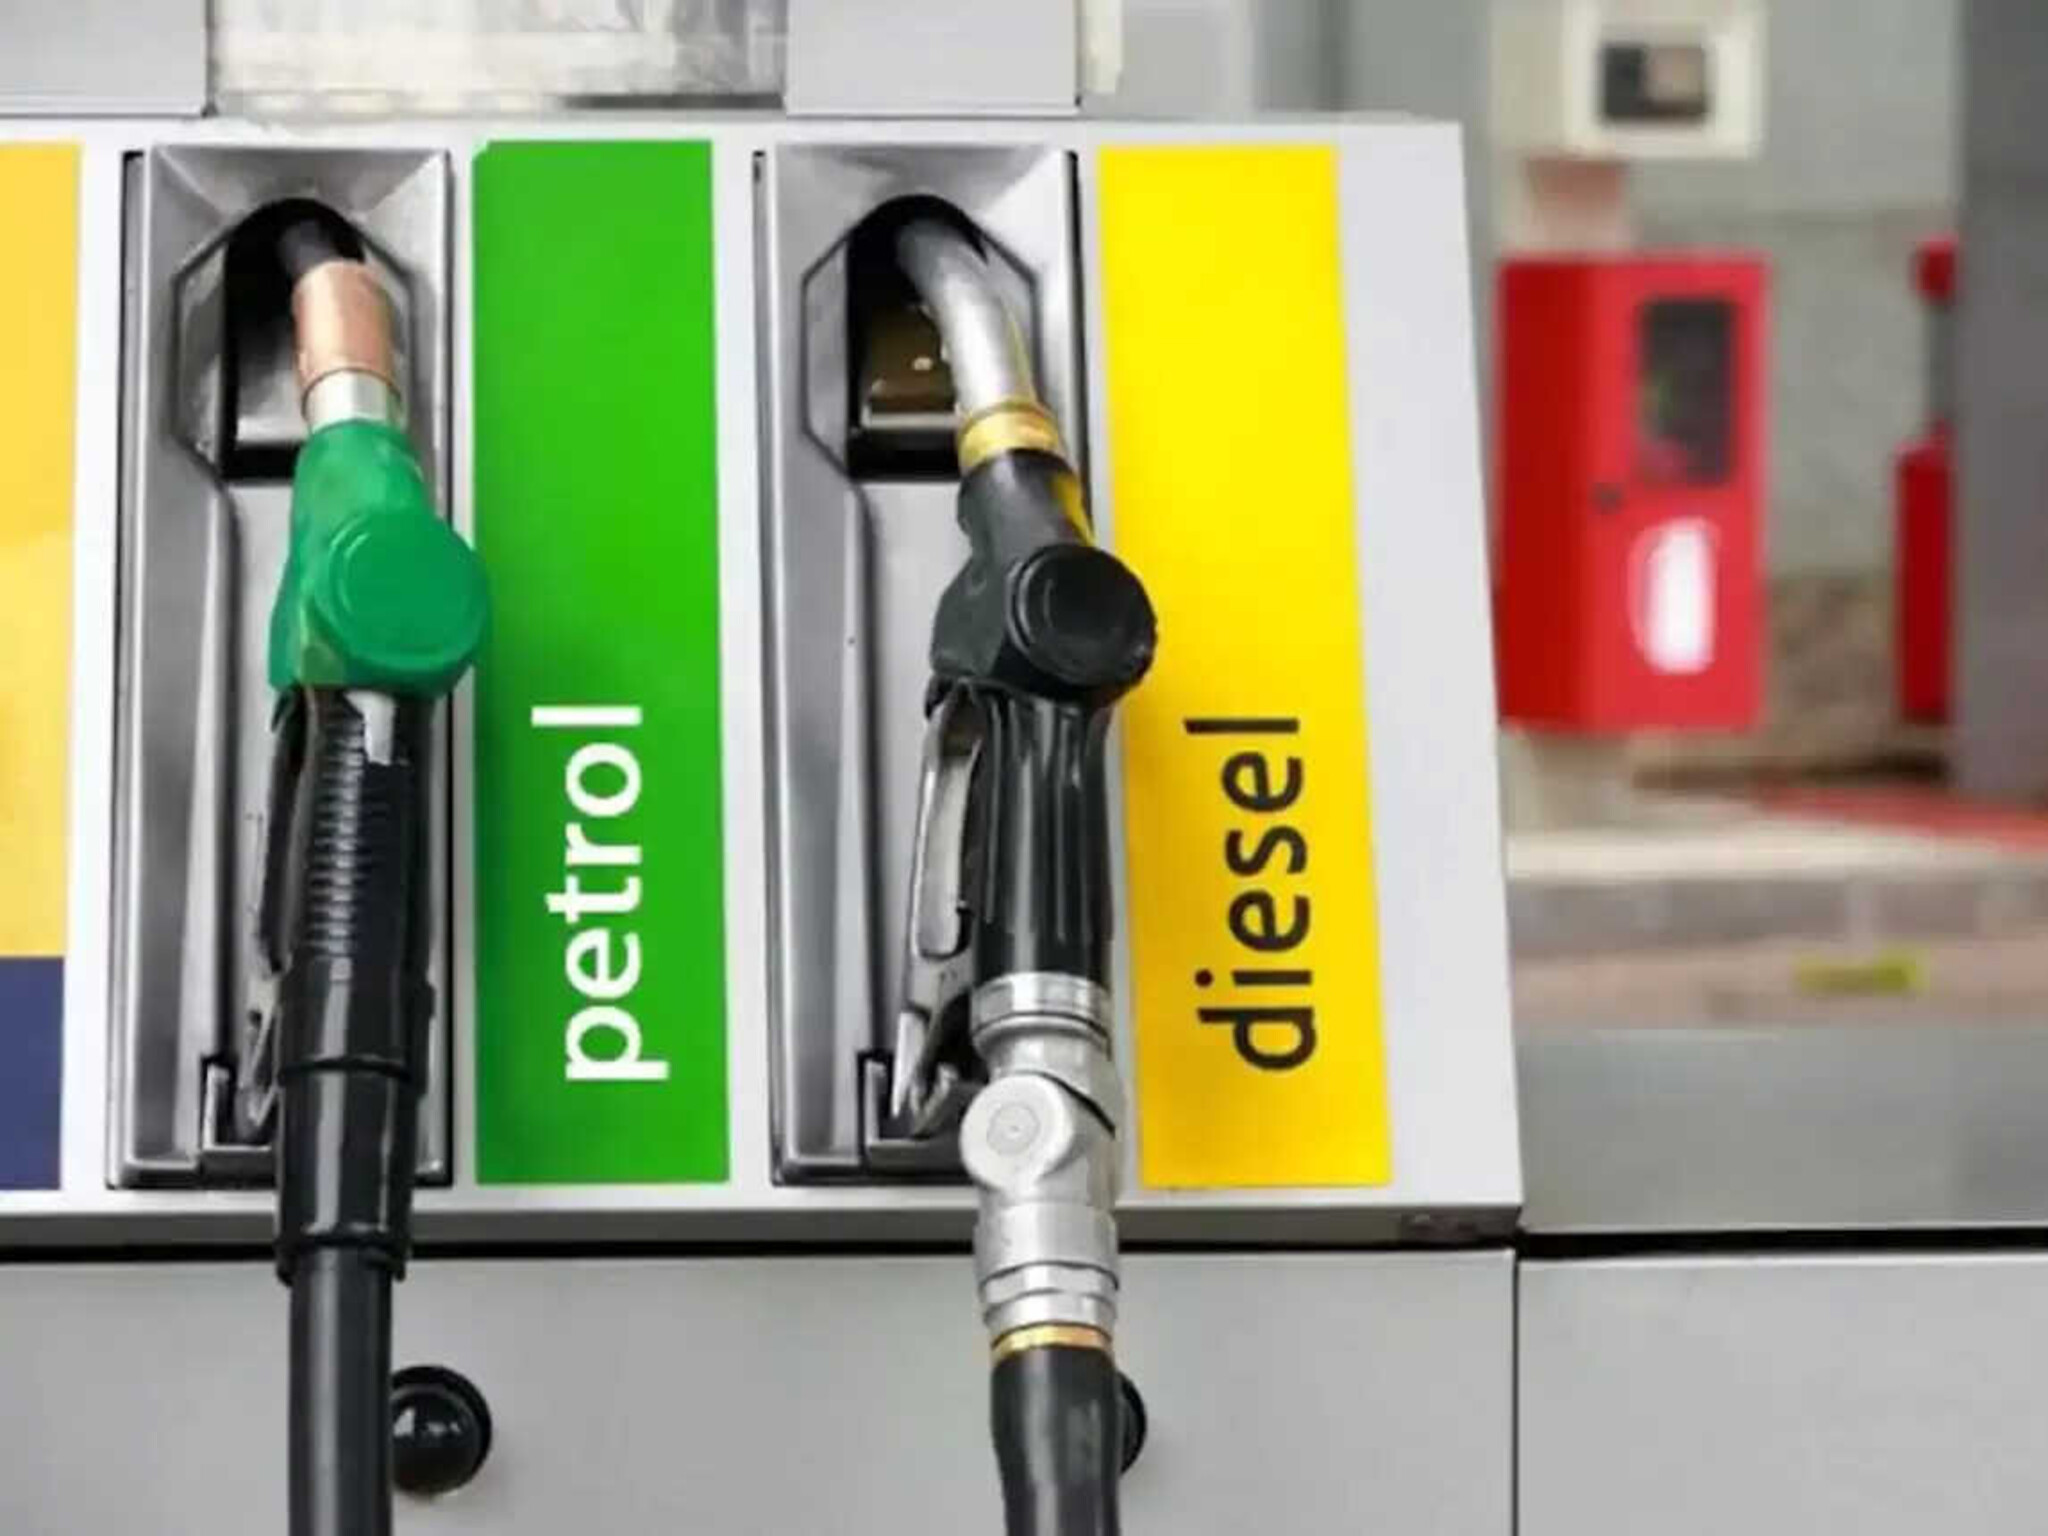 New fuel prices for April in the UAE have been announced now